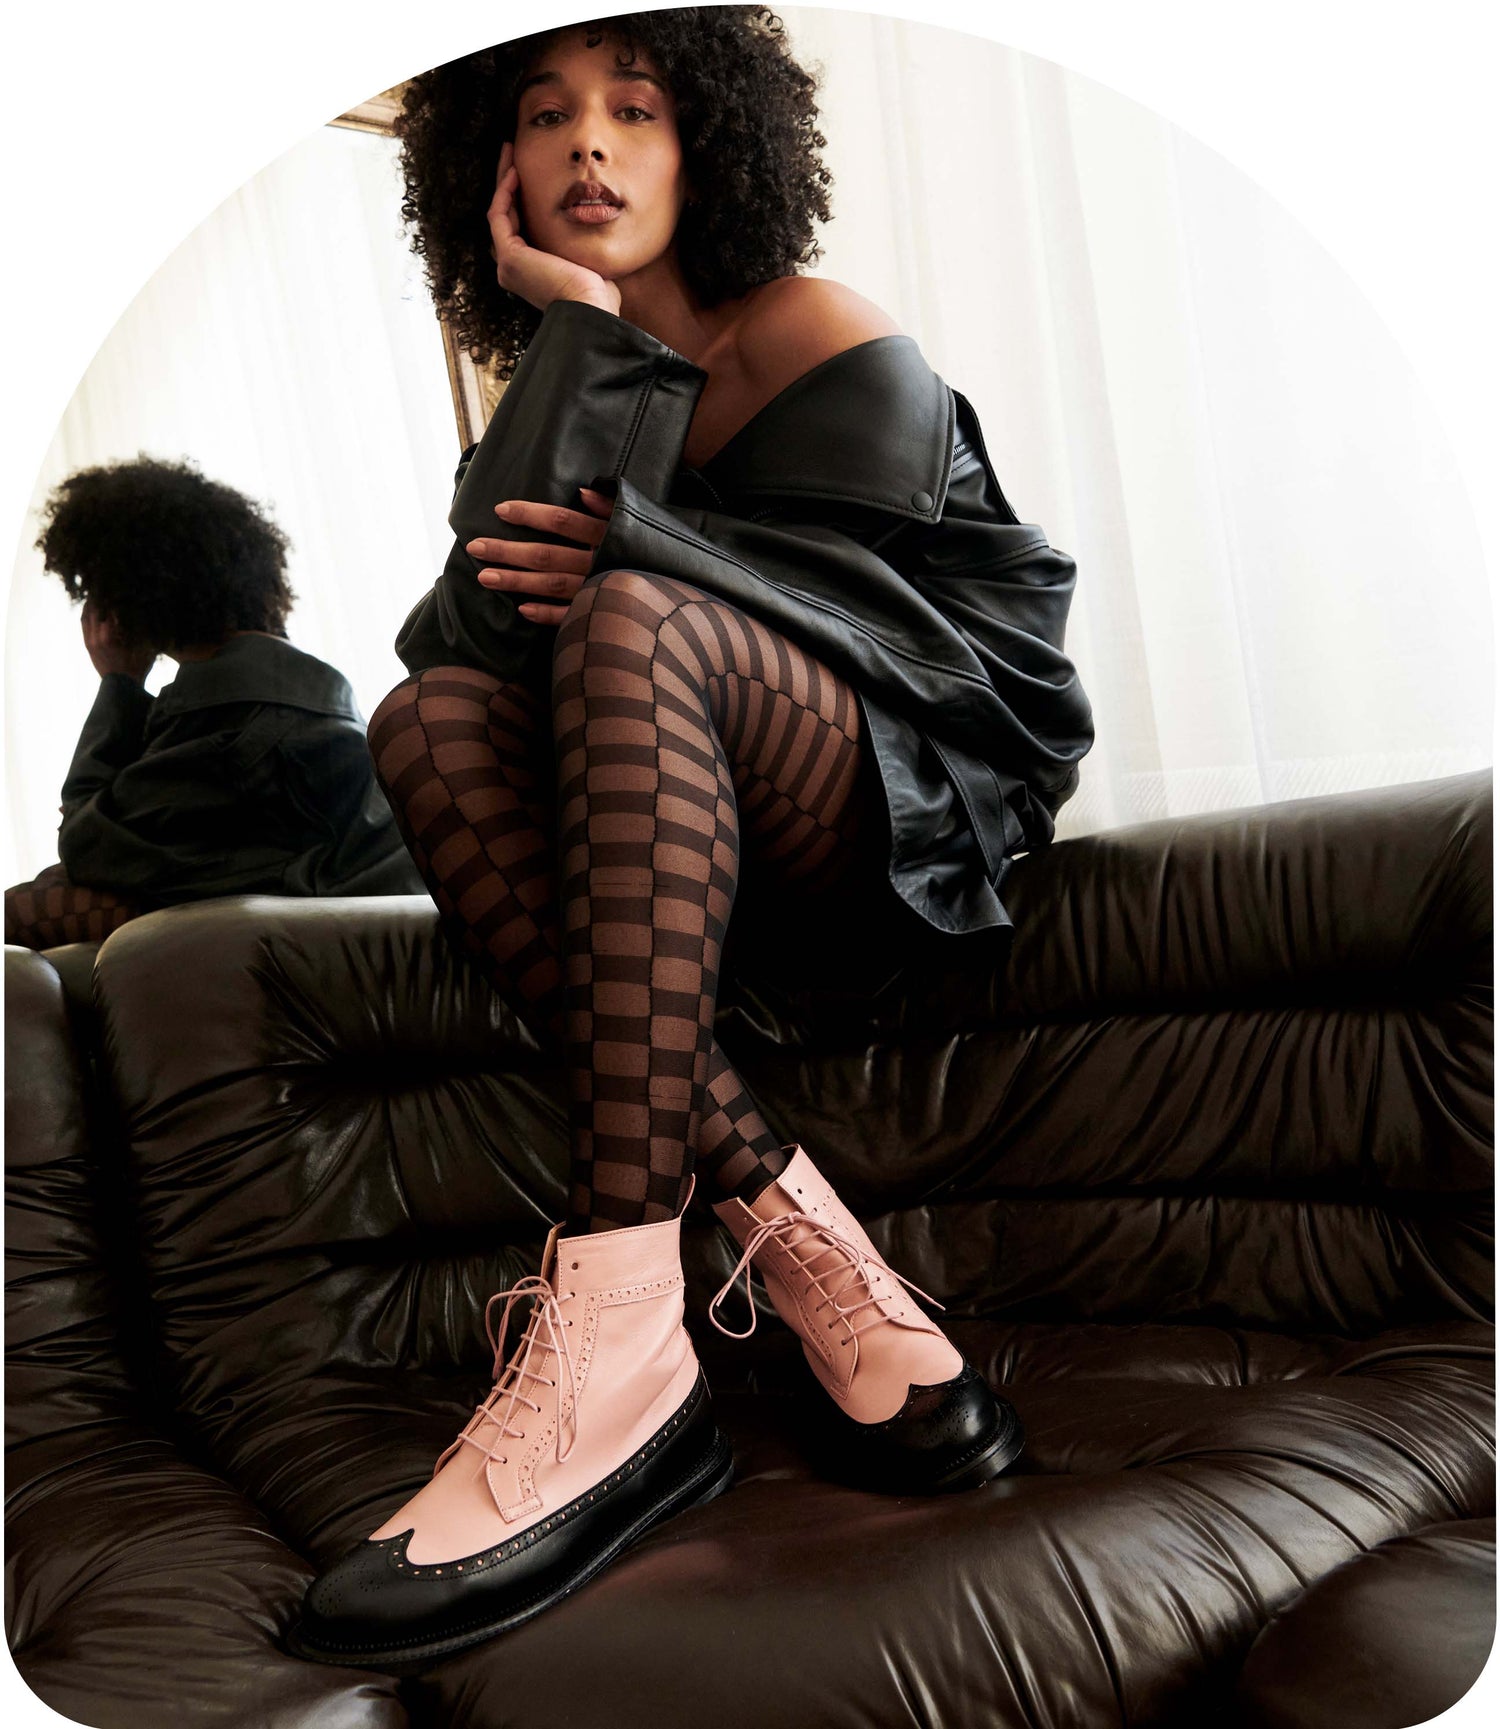 tilda, the long wing fashion boot with a pink leather upper and black wing is shown with a model wearing an oversized black leather jacket and checkered tights